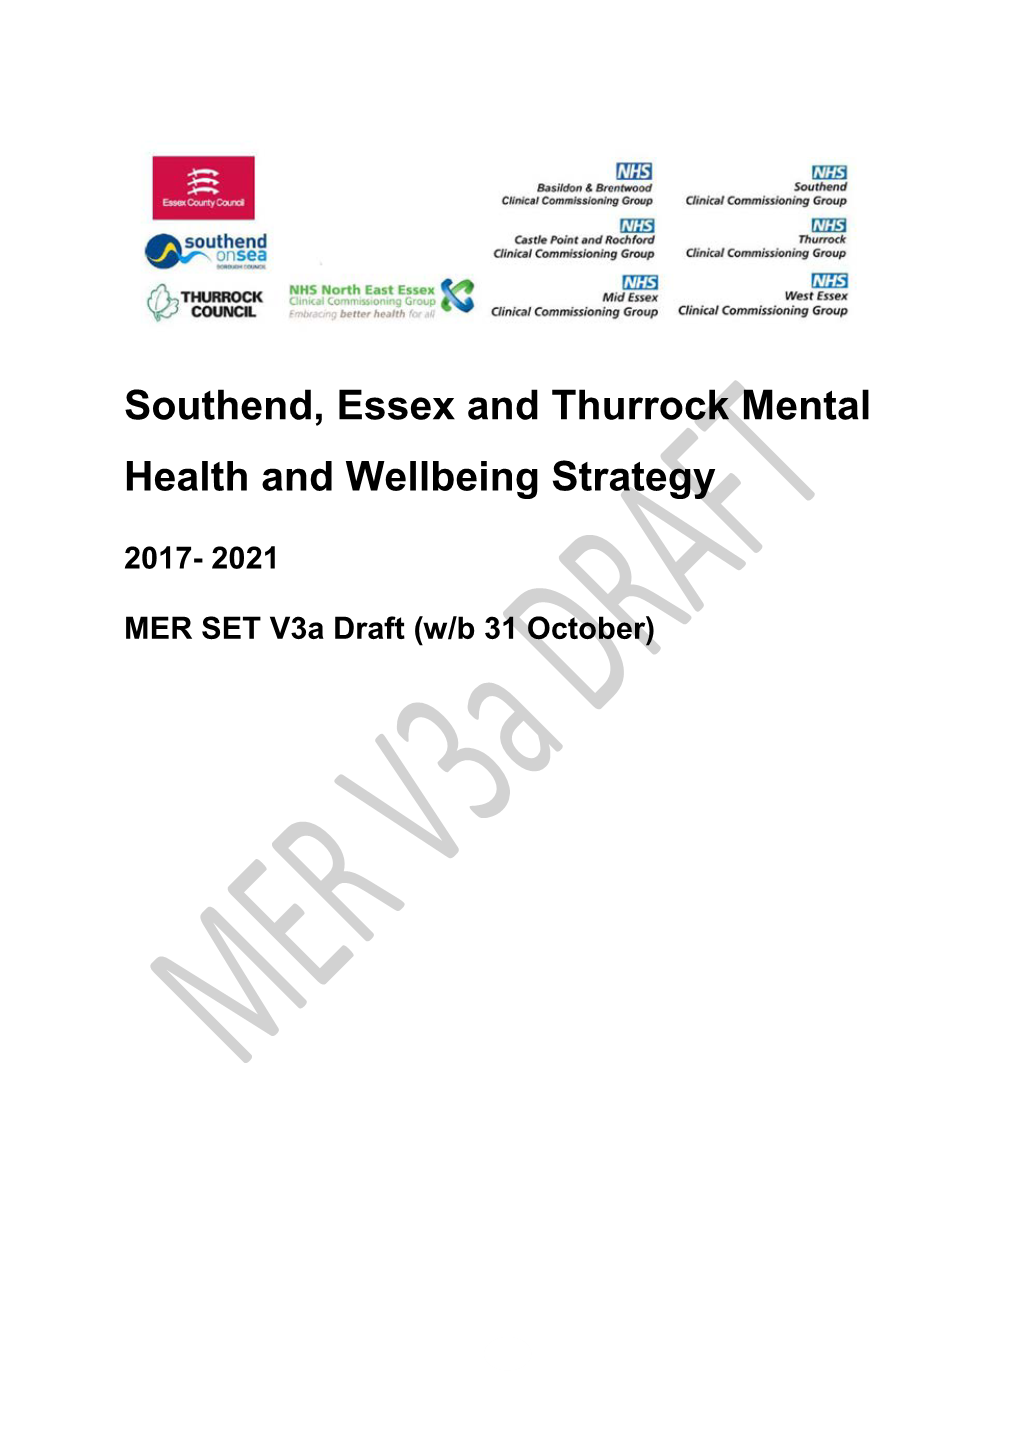 Southend, Essex and Thurrock Mental Health and Wellbeing Strategy